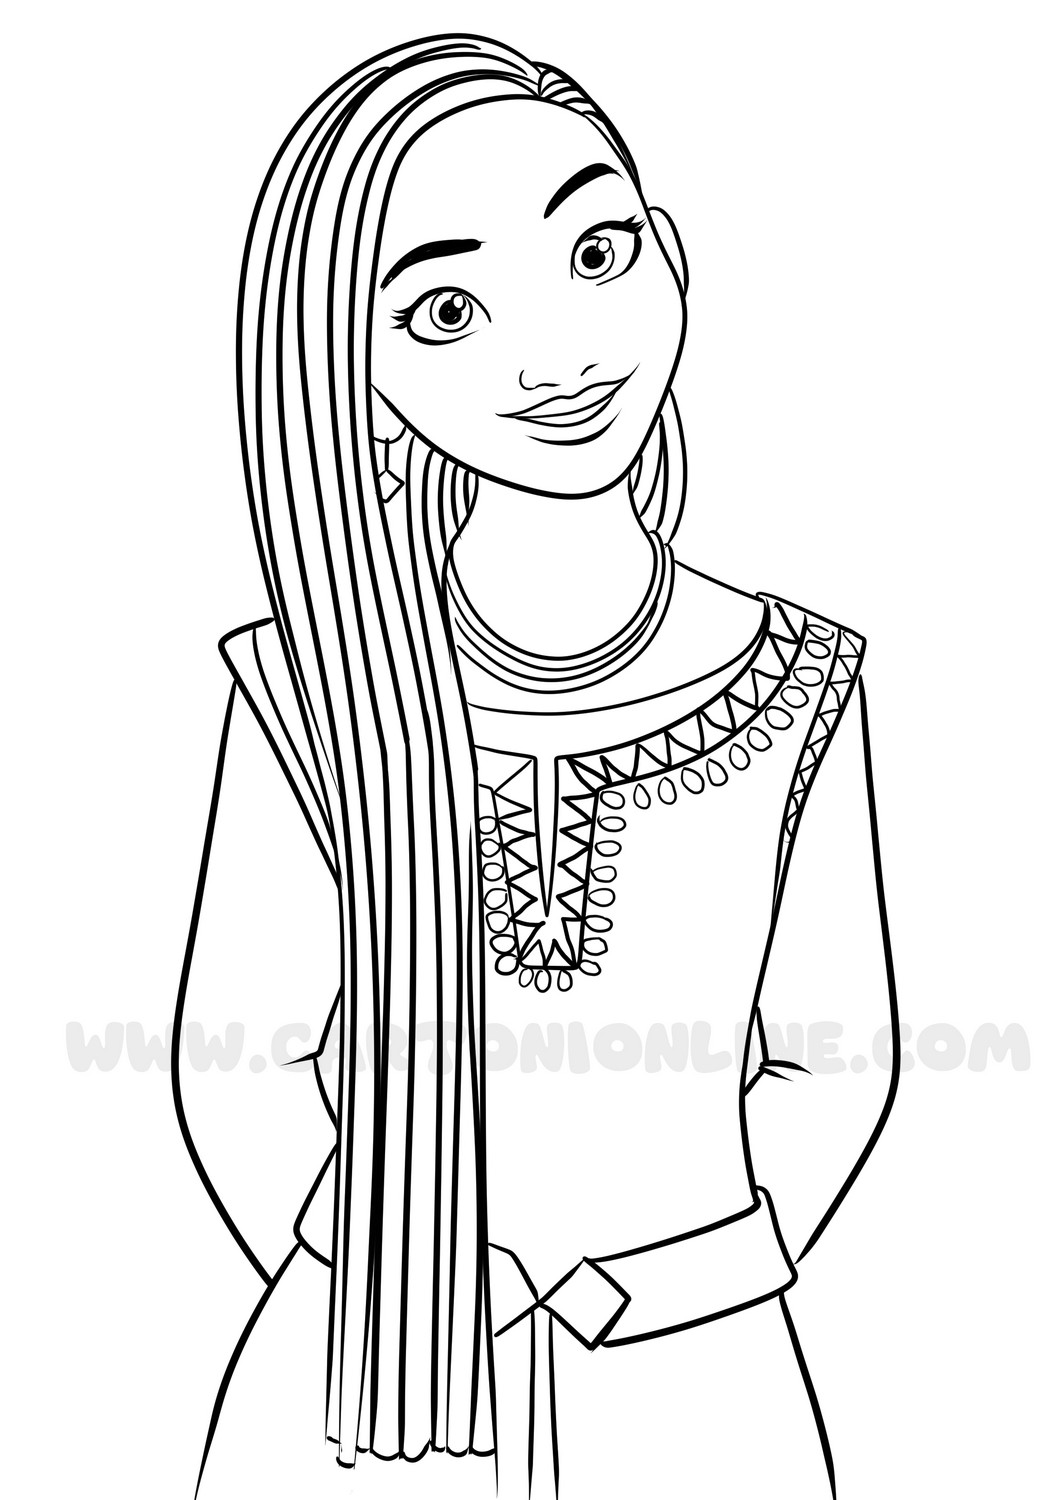 Asha 03 from Wish (Disney) drawing to print and color